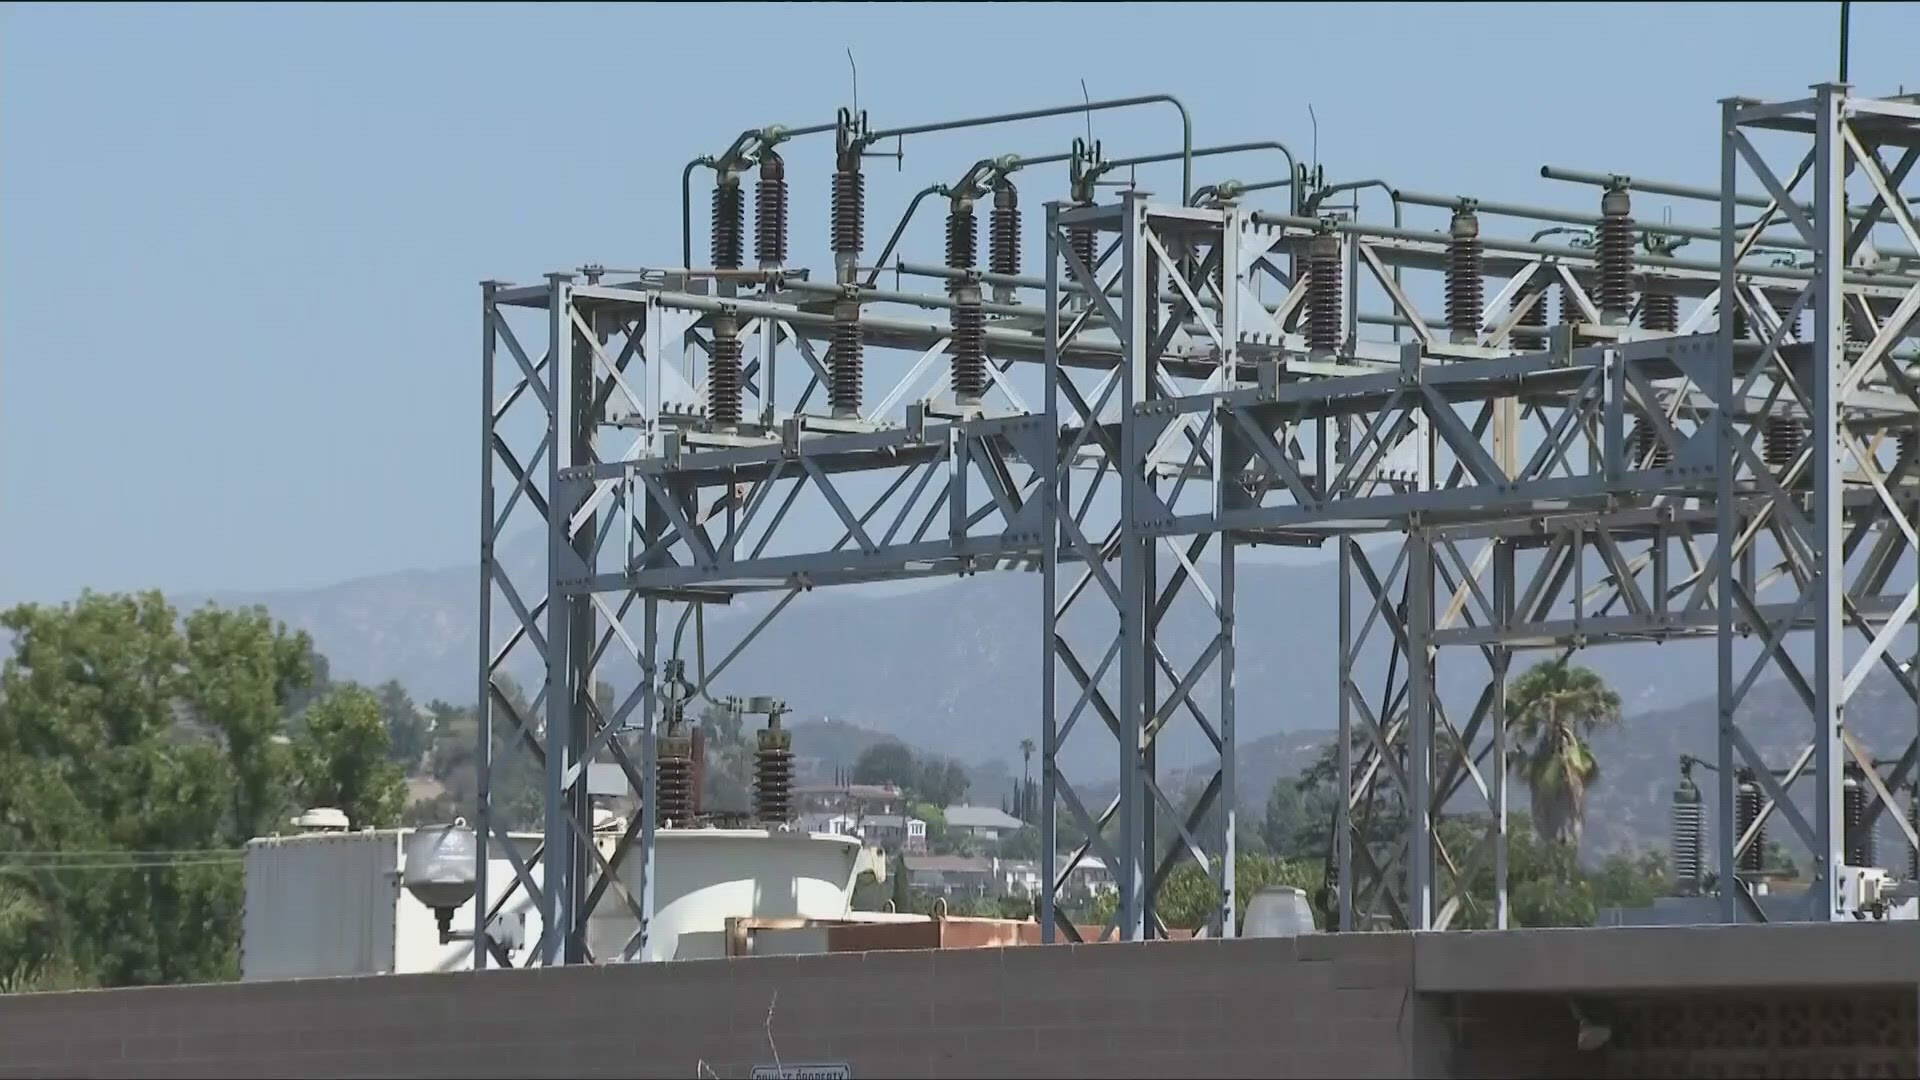 San Diego Gas & Electric will pilot a "virtual power plant" in the East County community of Shelter Valley, intended to reduce energy demand.